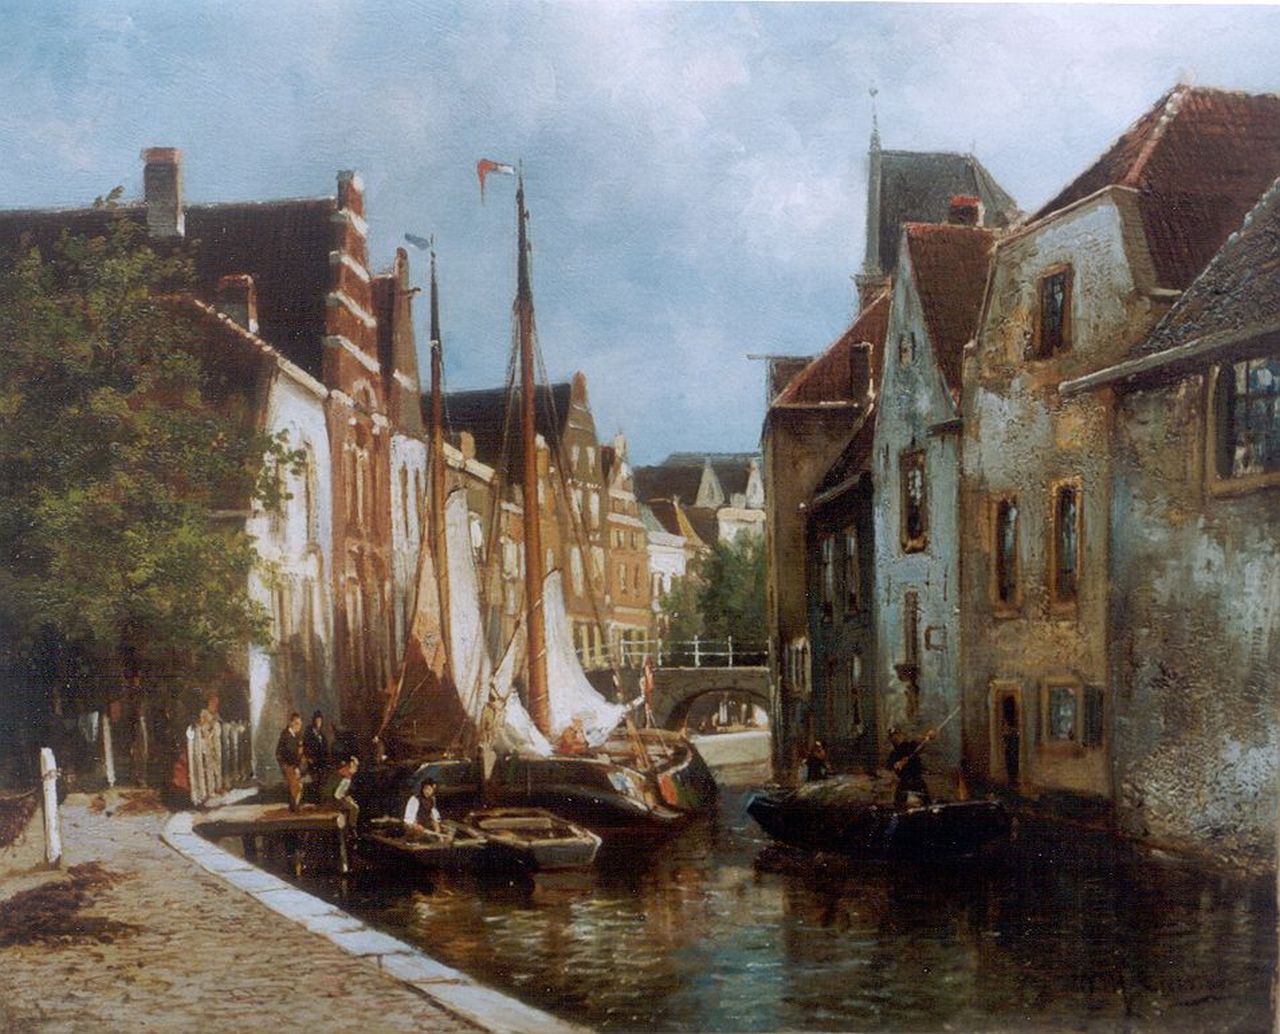 Eickelberg W.H.  | Willem Hendrik Eickelberg, A view of a canal with moored boats, oil on canvas 31.4 x 36.1 cm, signed l.r.